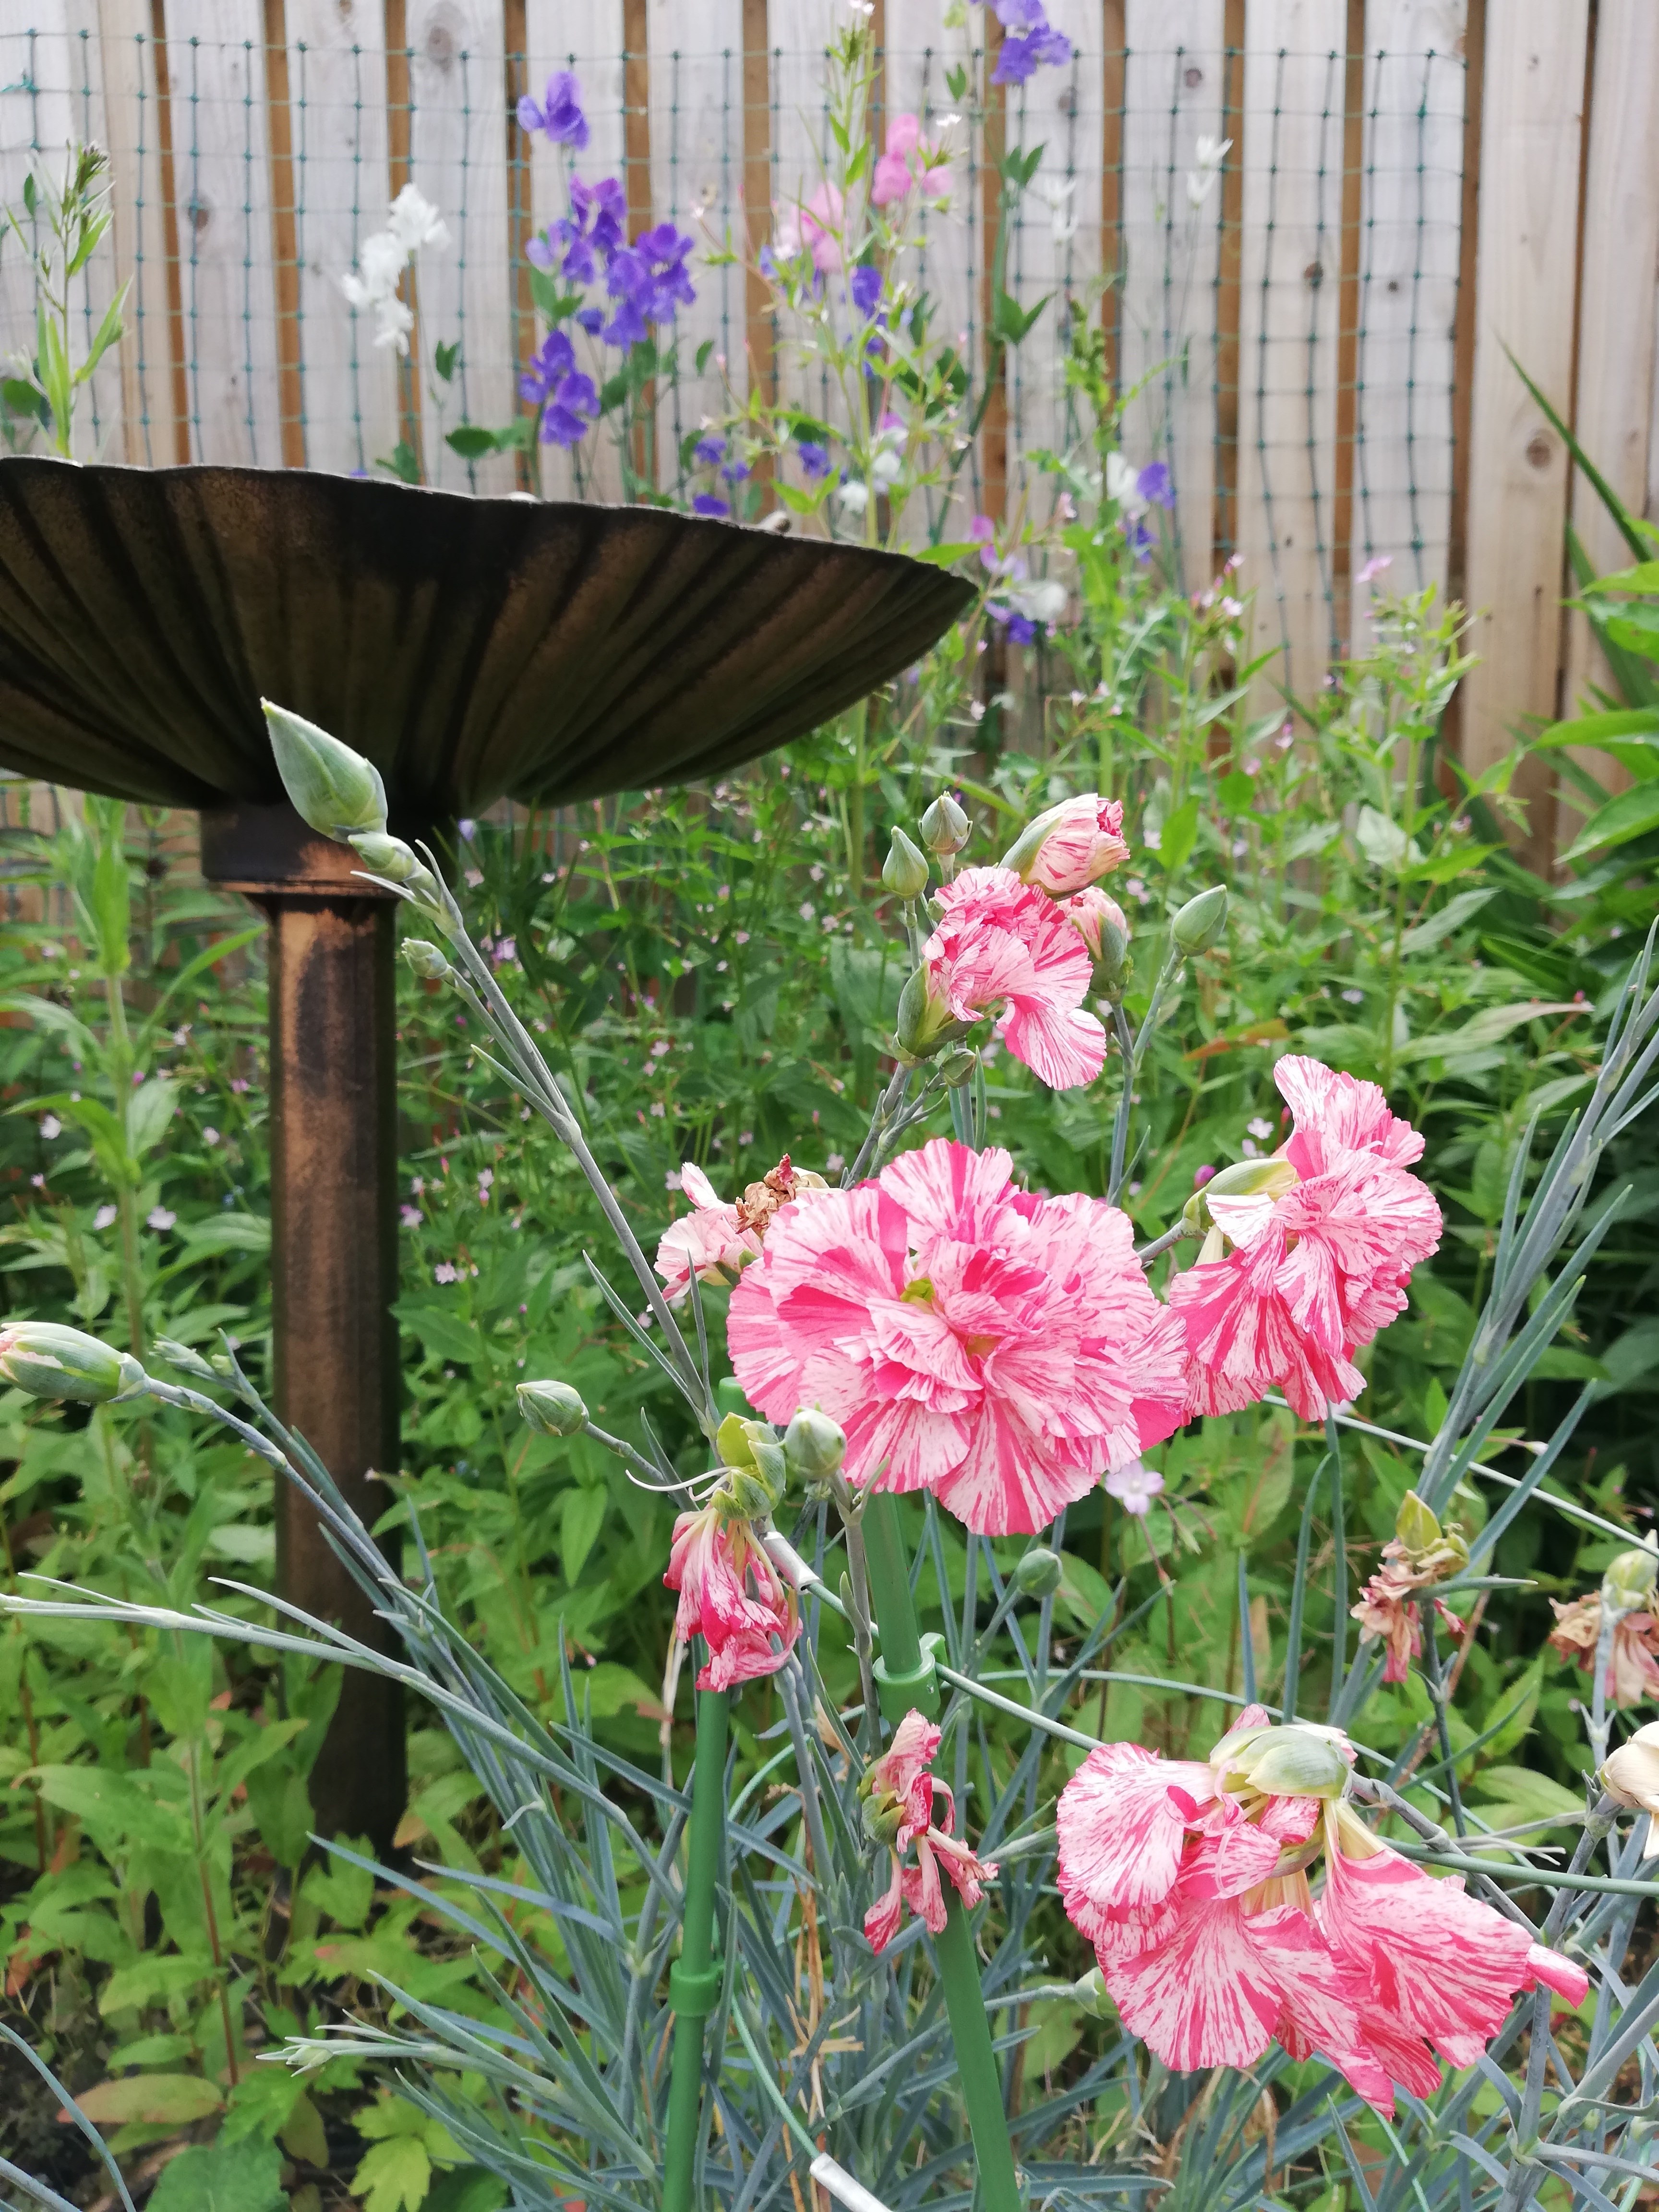 A pink stripy carnation in front of a copper bird bath, a wooden fence behind.